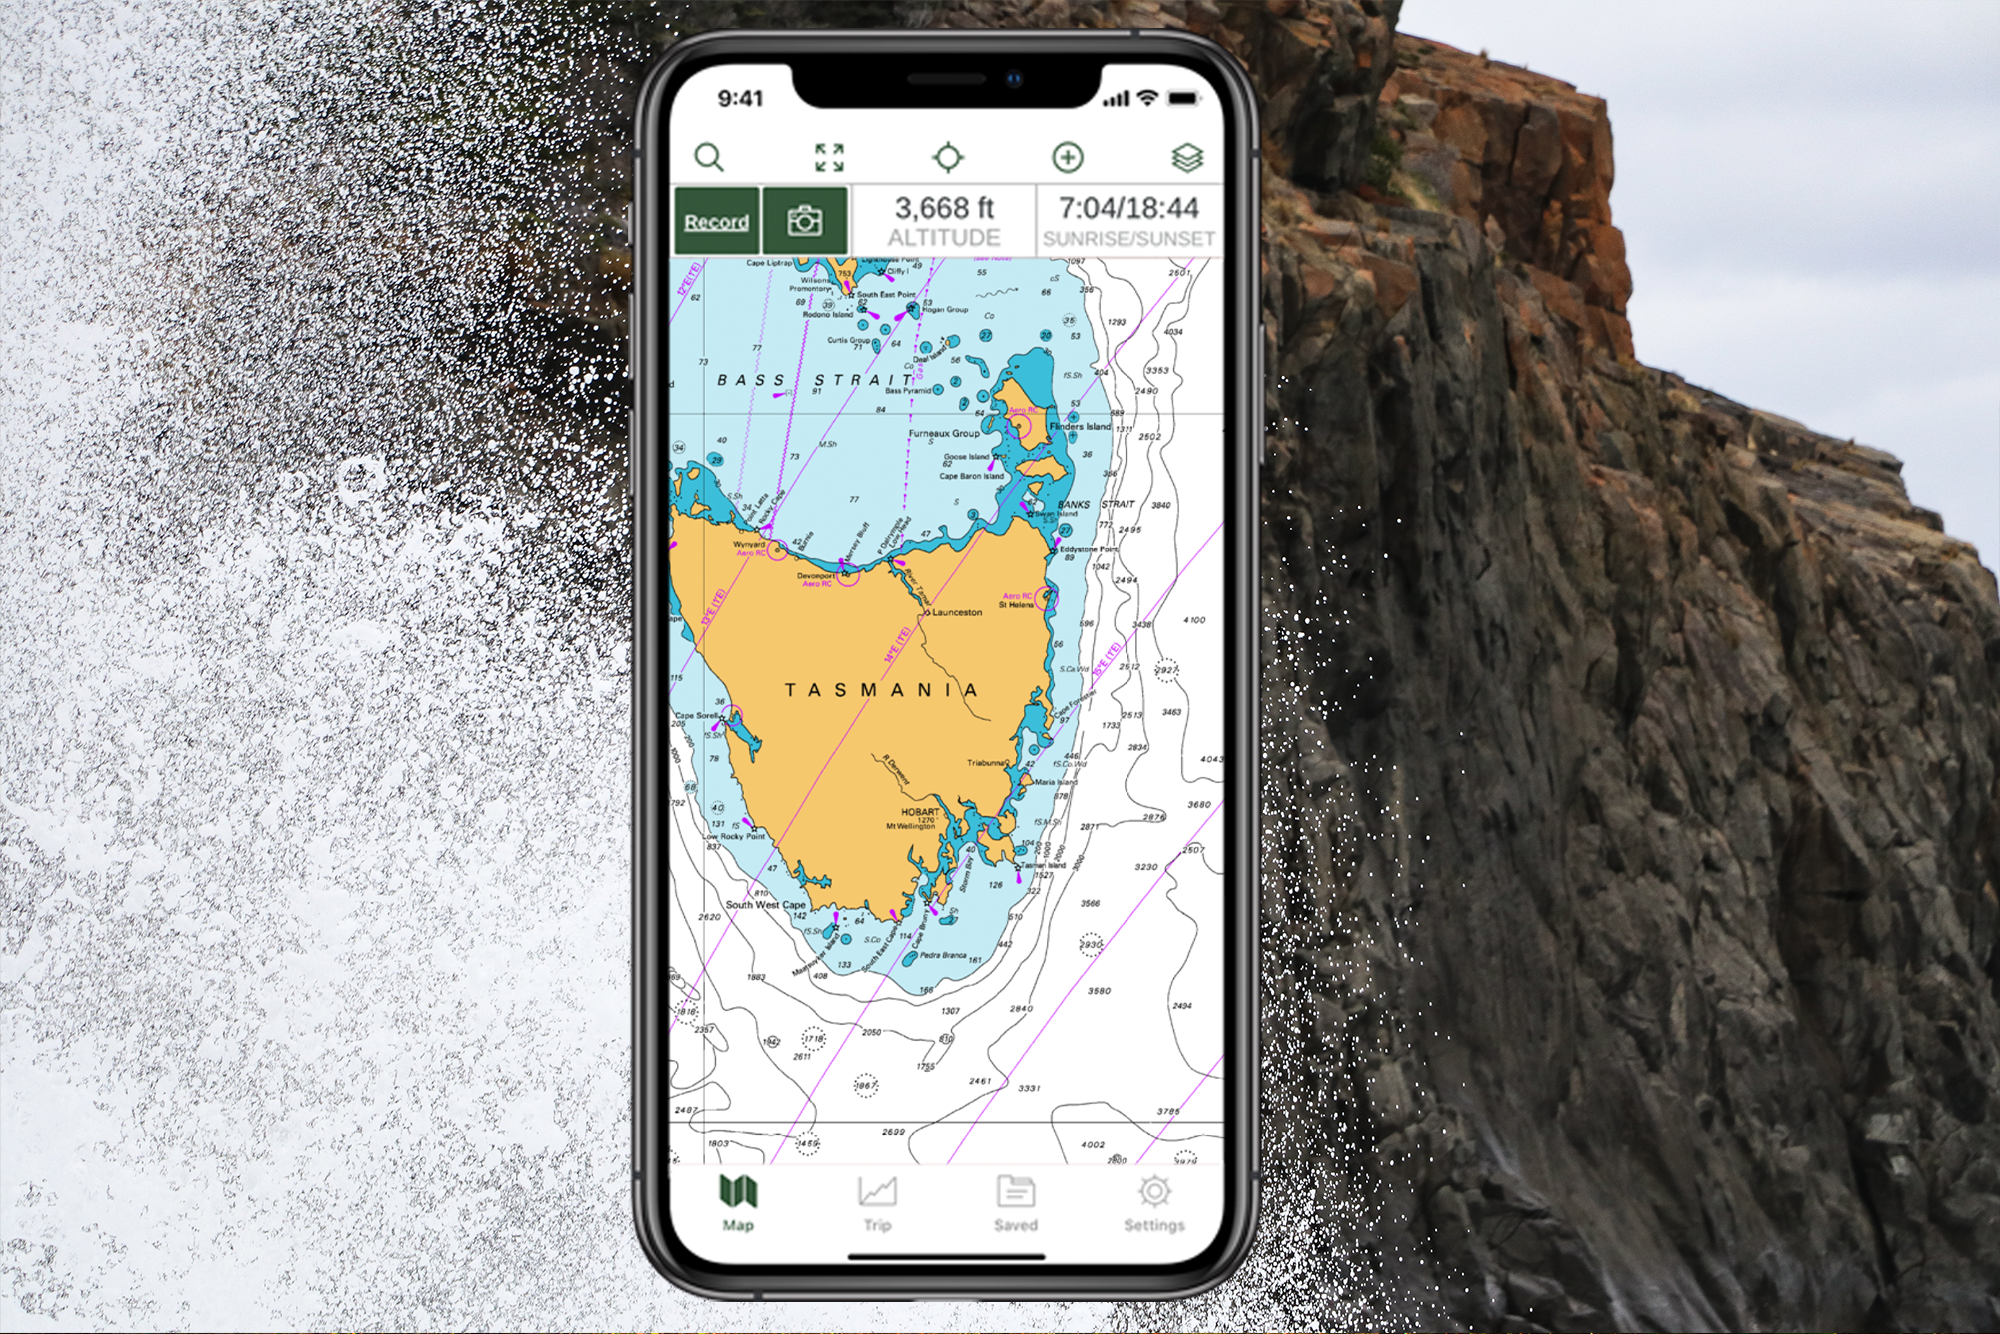 Tasmania nautical map displayed on iPhone interface with ocean background.